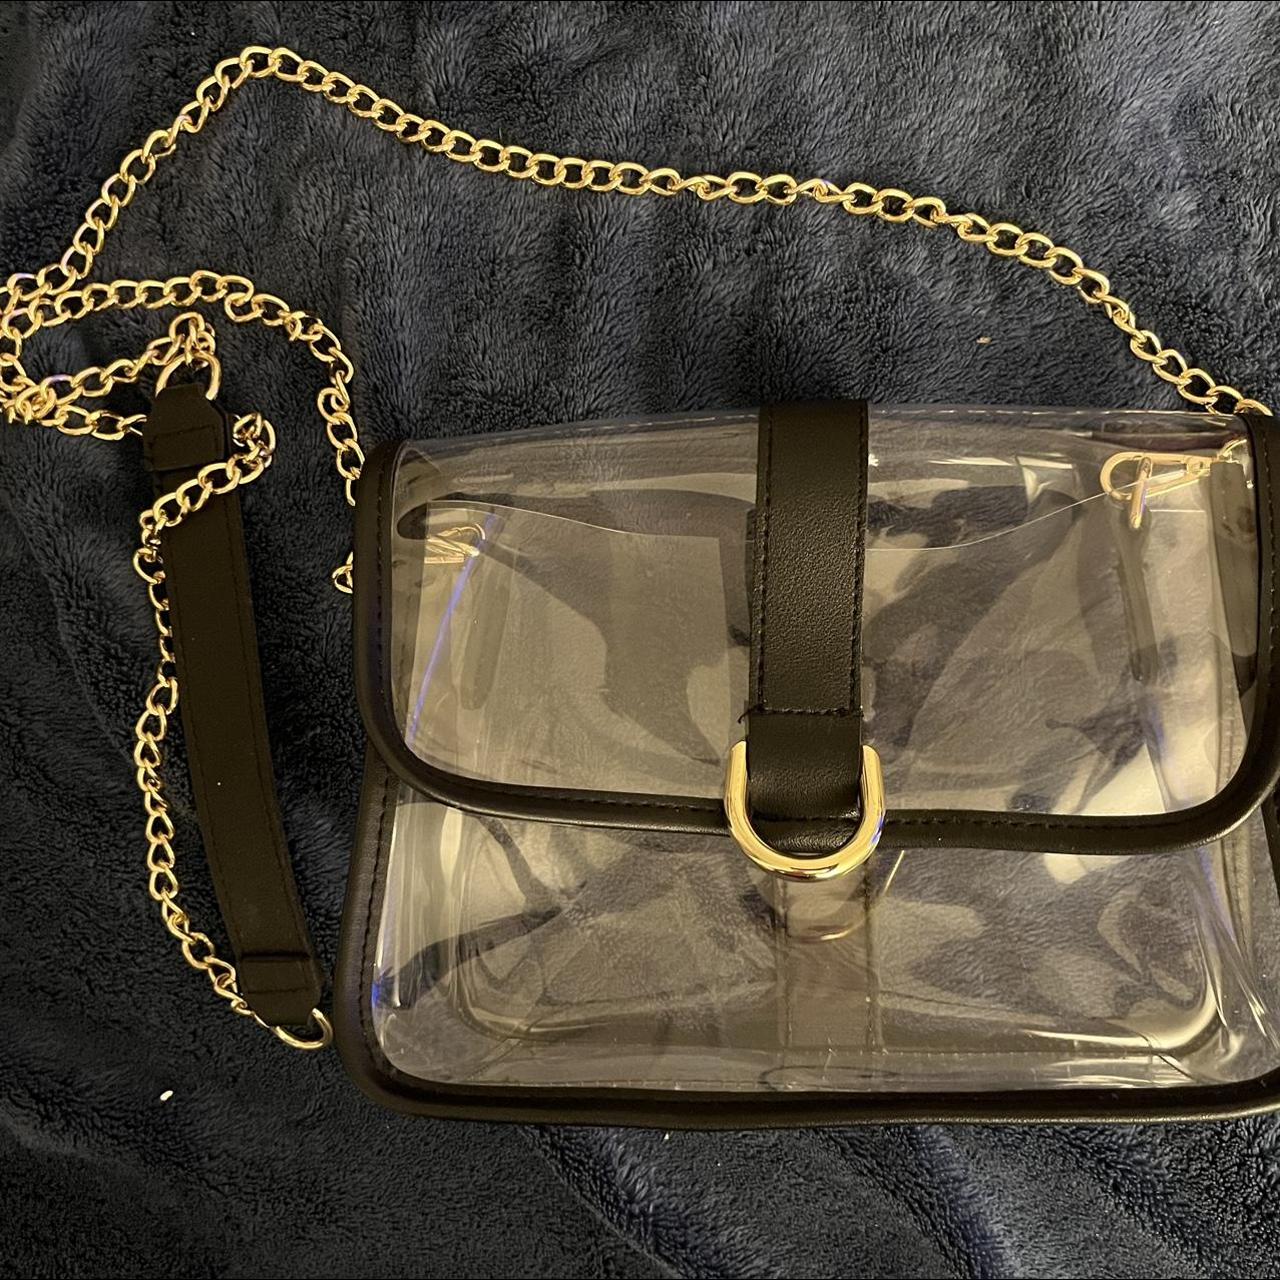 CLEAR STADIUM BAG WITH GOLD ACCENTS